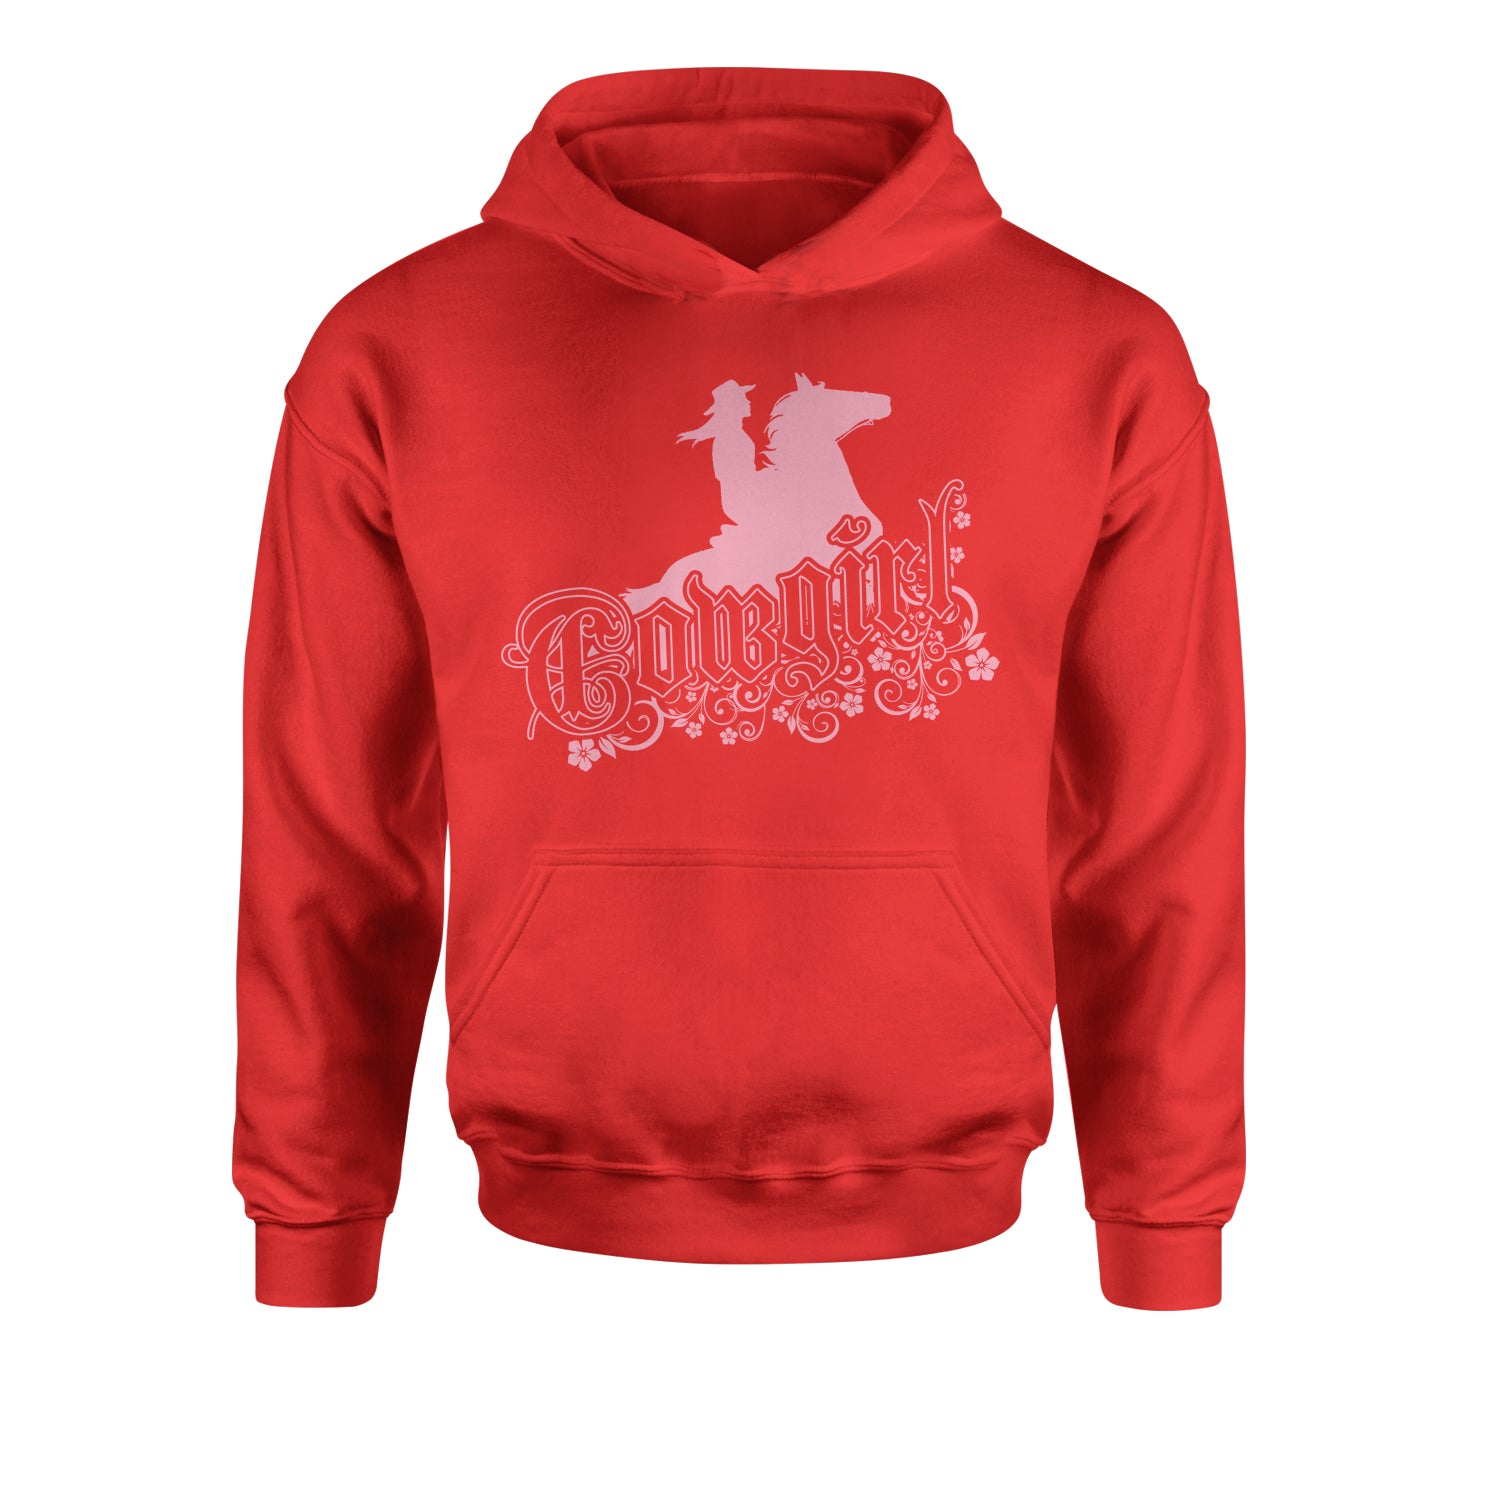 Cowgirl Riding A Horse Youth-Sized Hoodie country, daughter, farmers, girl, horses by Expression Tees